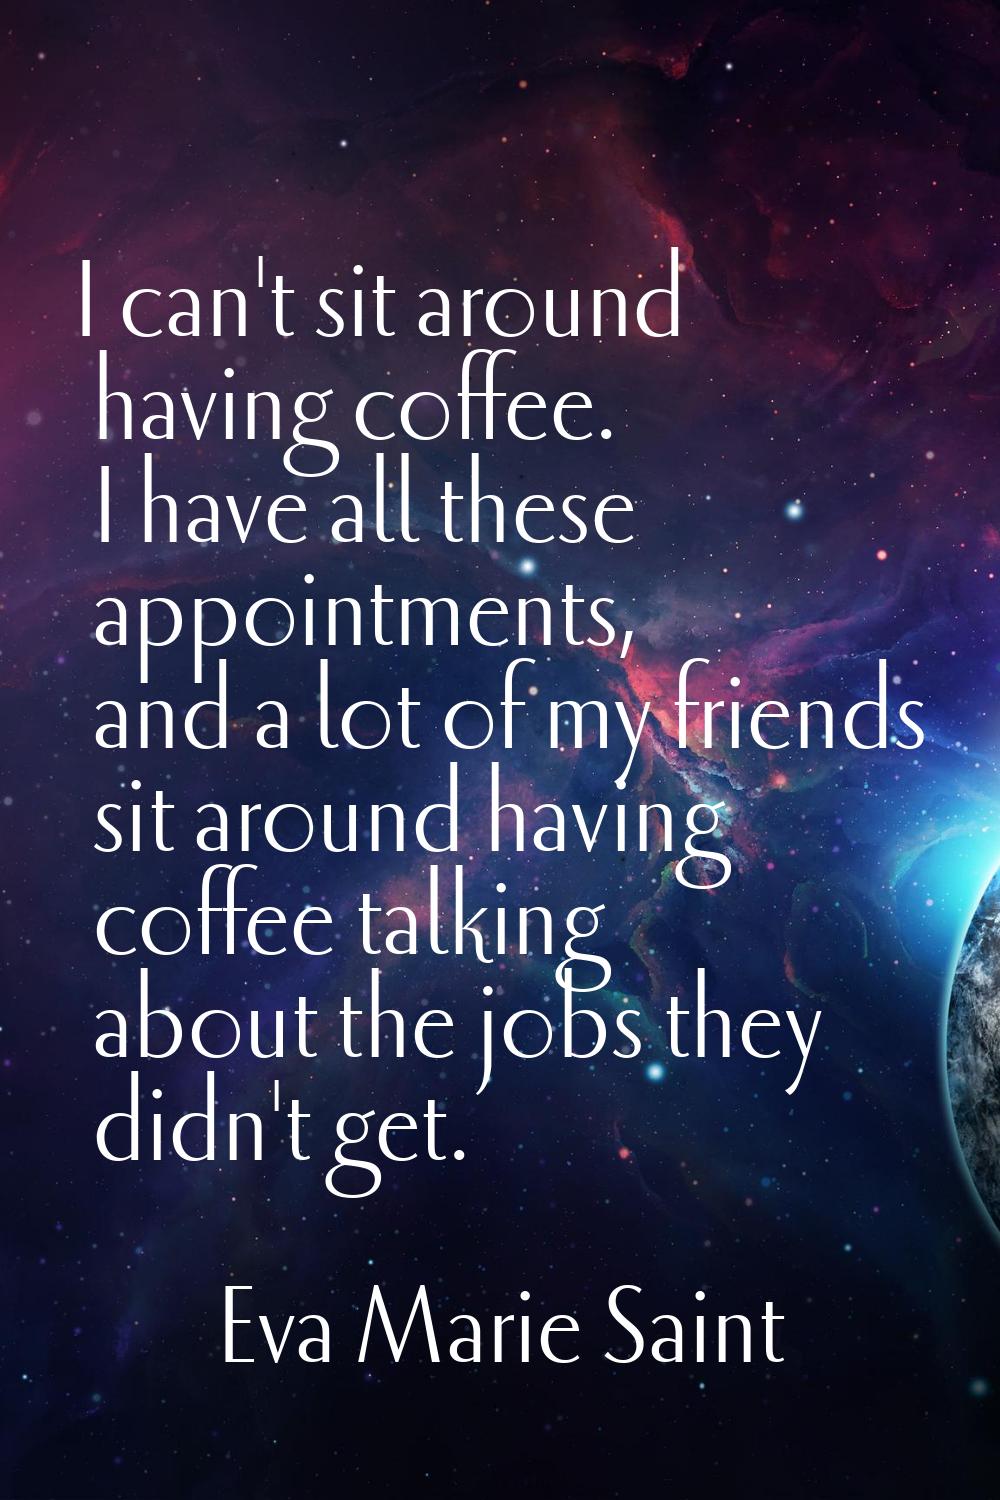 I can't sit around having coffee. I have all these appointments, and a lot of my friends sit around